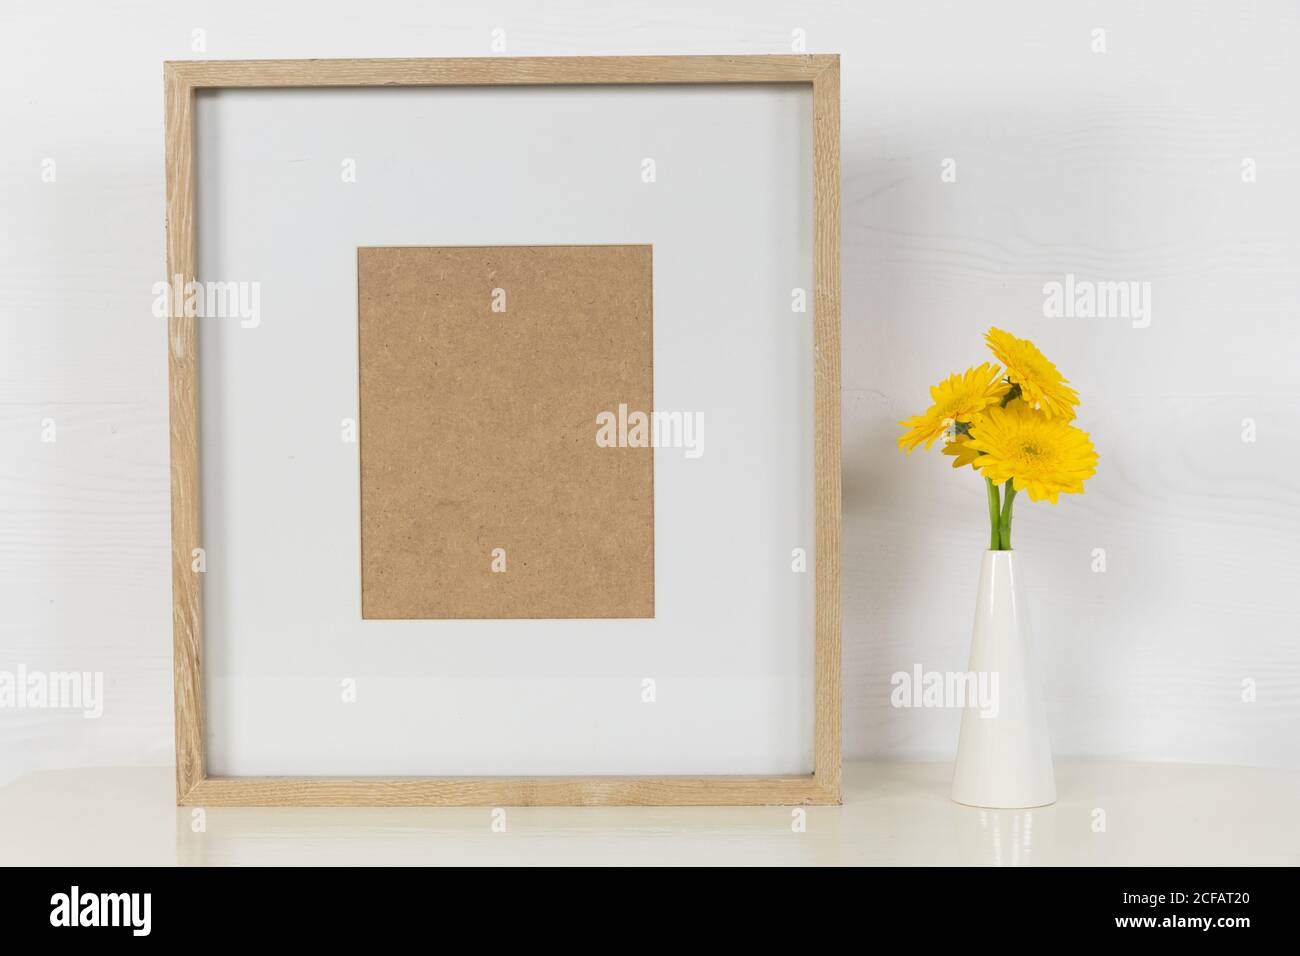 View of a picture frame, with yellow tulips placed in a glass vase on plain white background Stock Photo